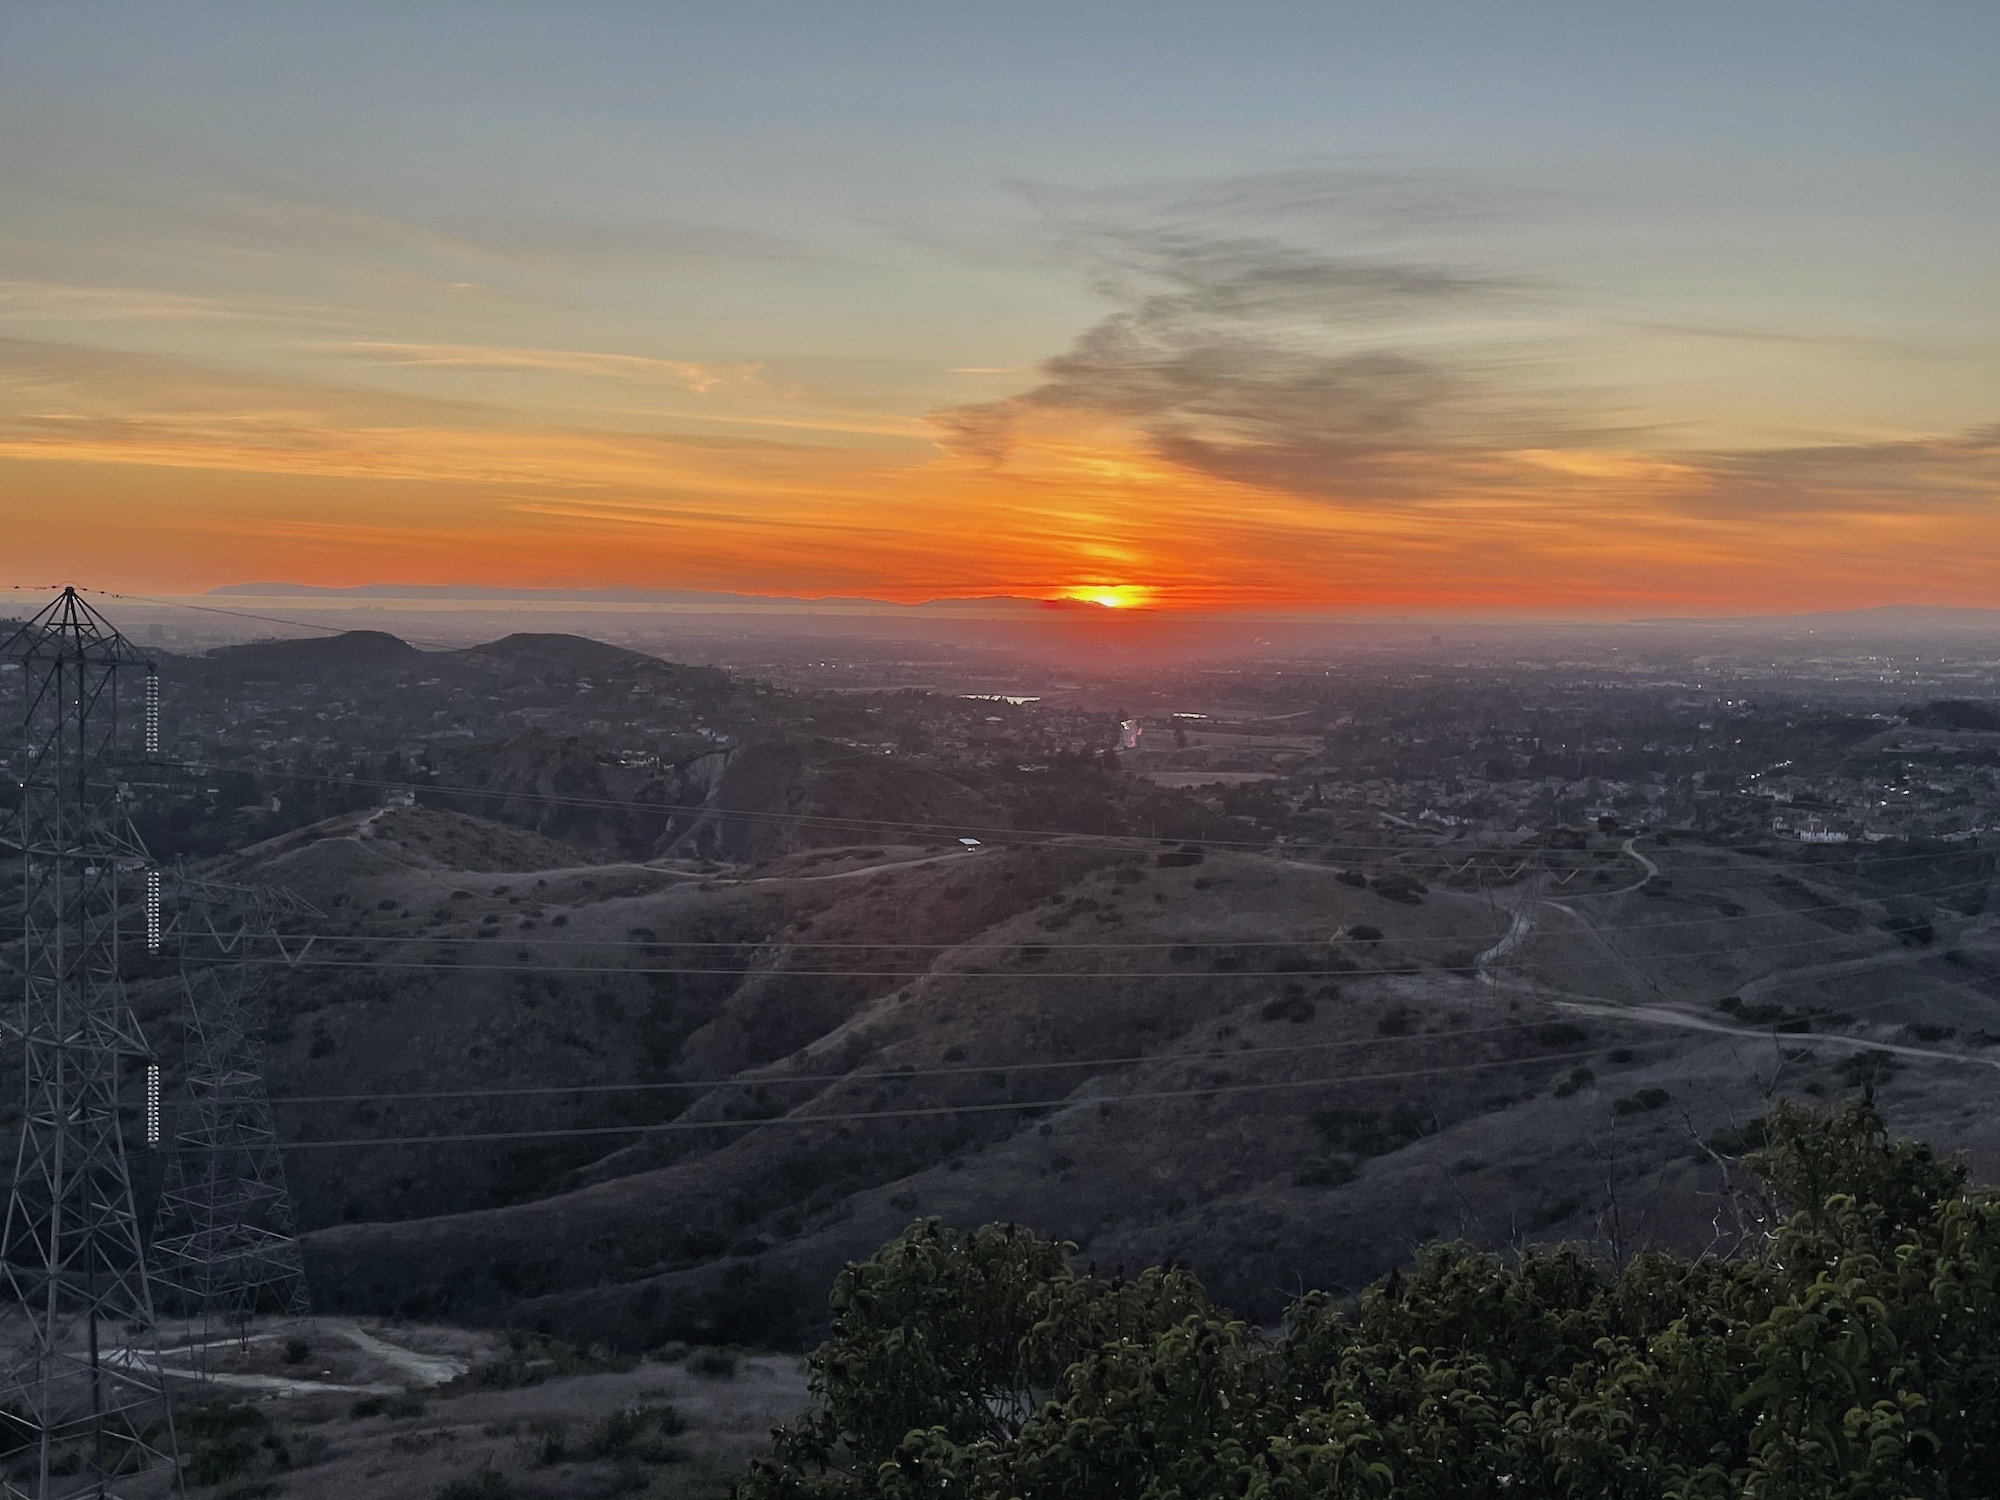 Sunset over pacific ocean - robbers roost vantage point - anaheim hills -3